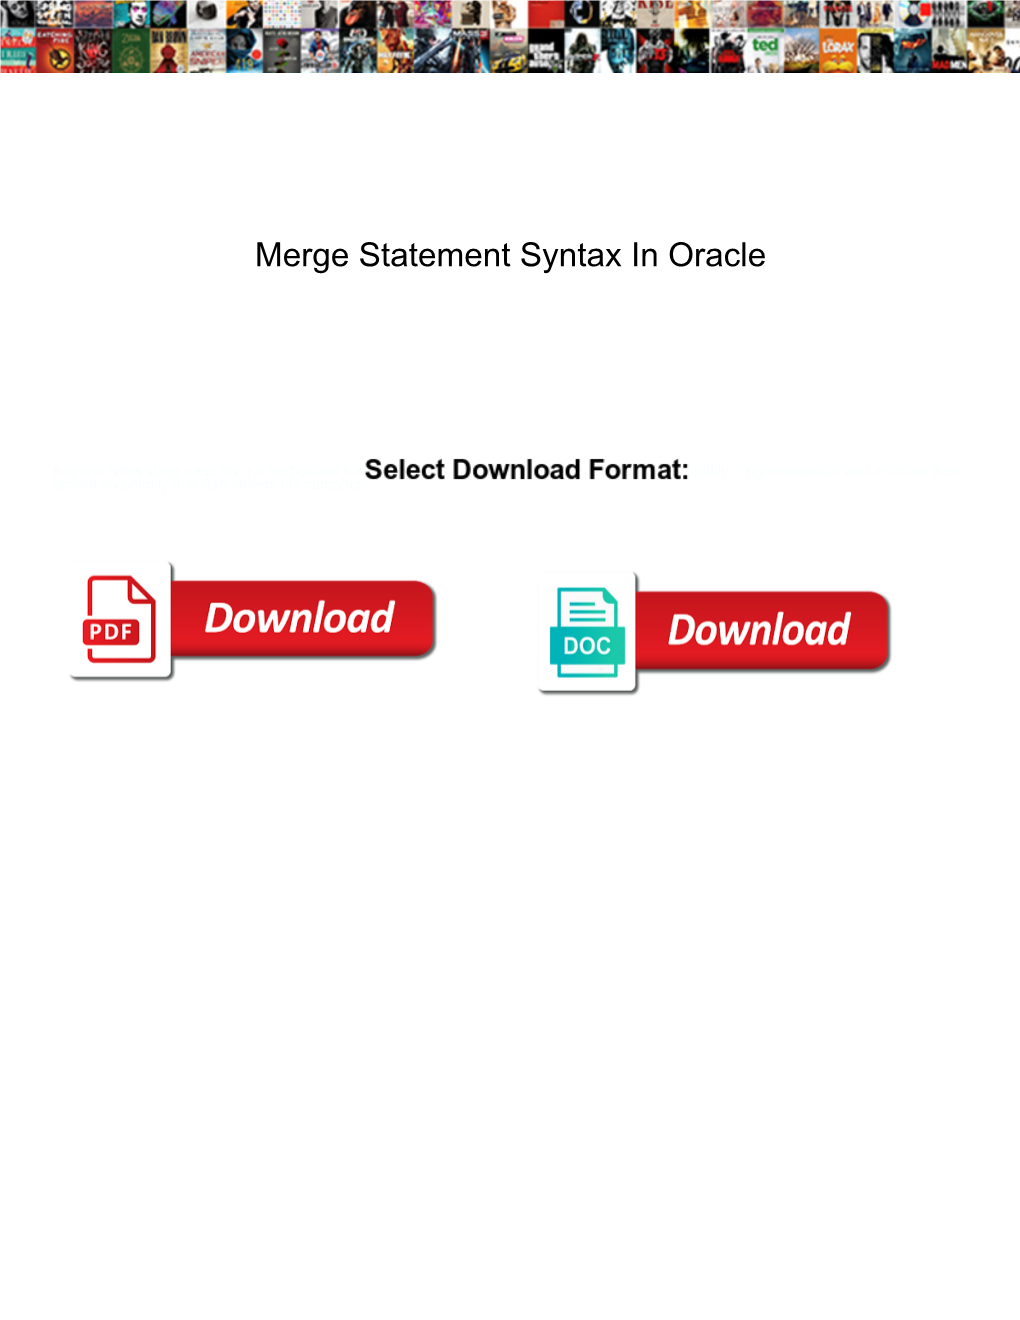 Merge Statement Syntax in Oracle